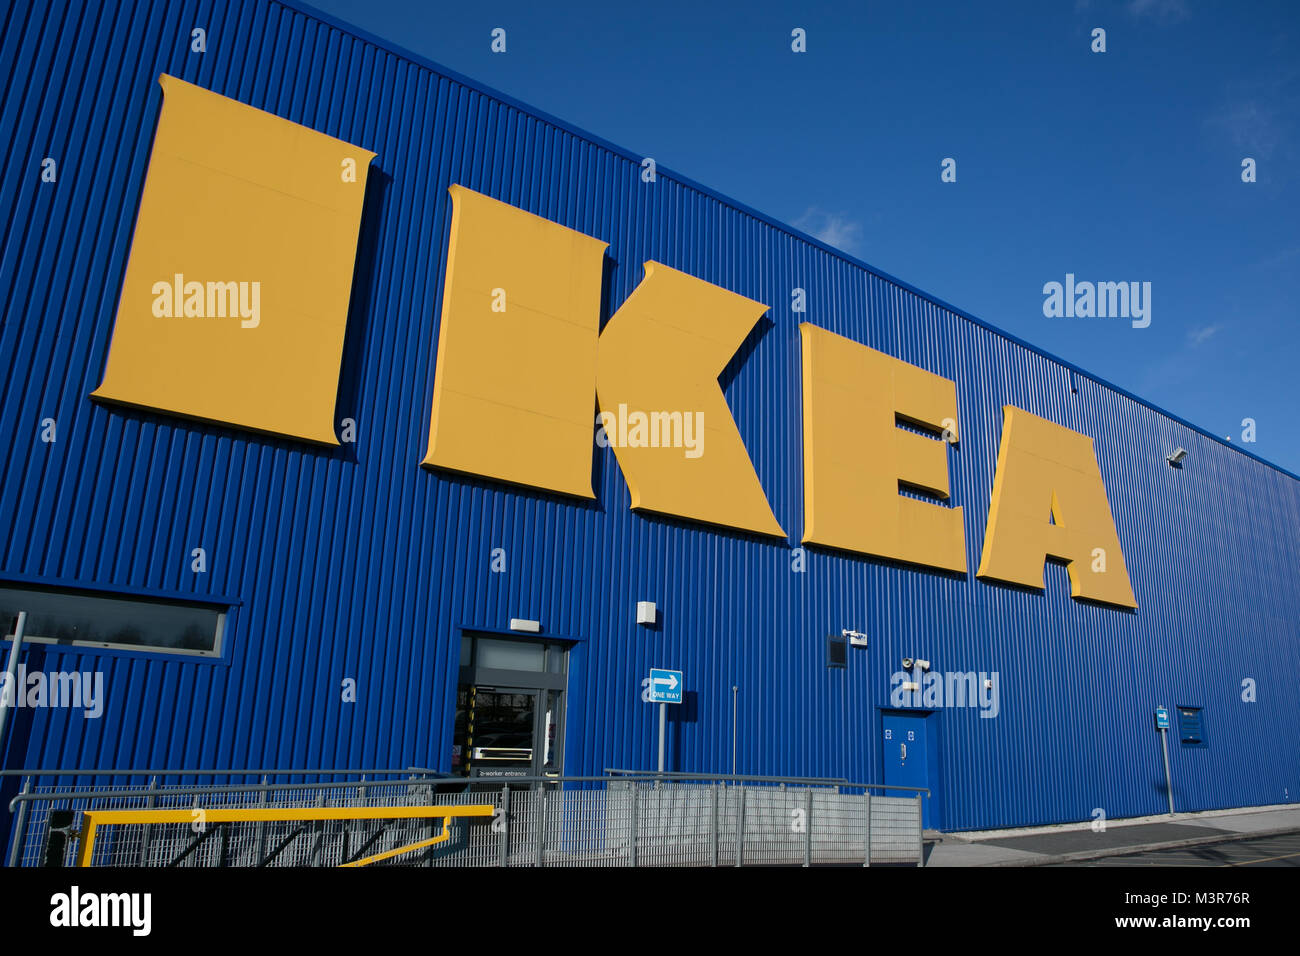 Front of IKEA store with large yellow letters. Taken 12th February 2018 after IKEA founder Ingvar Kamprad died aged 91. Stock Photo